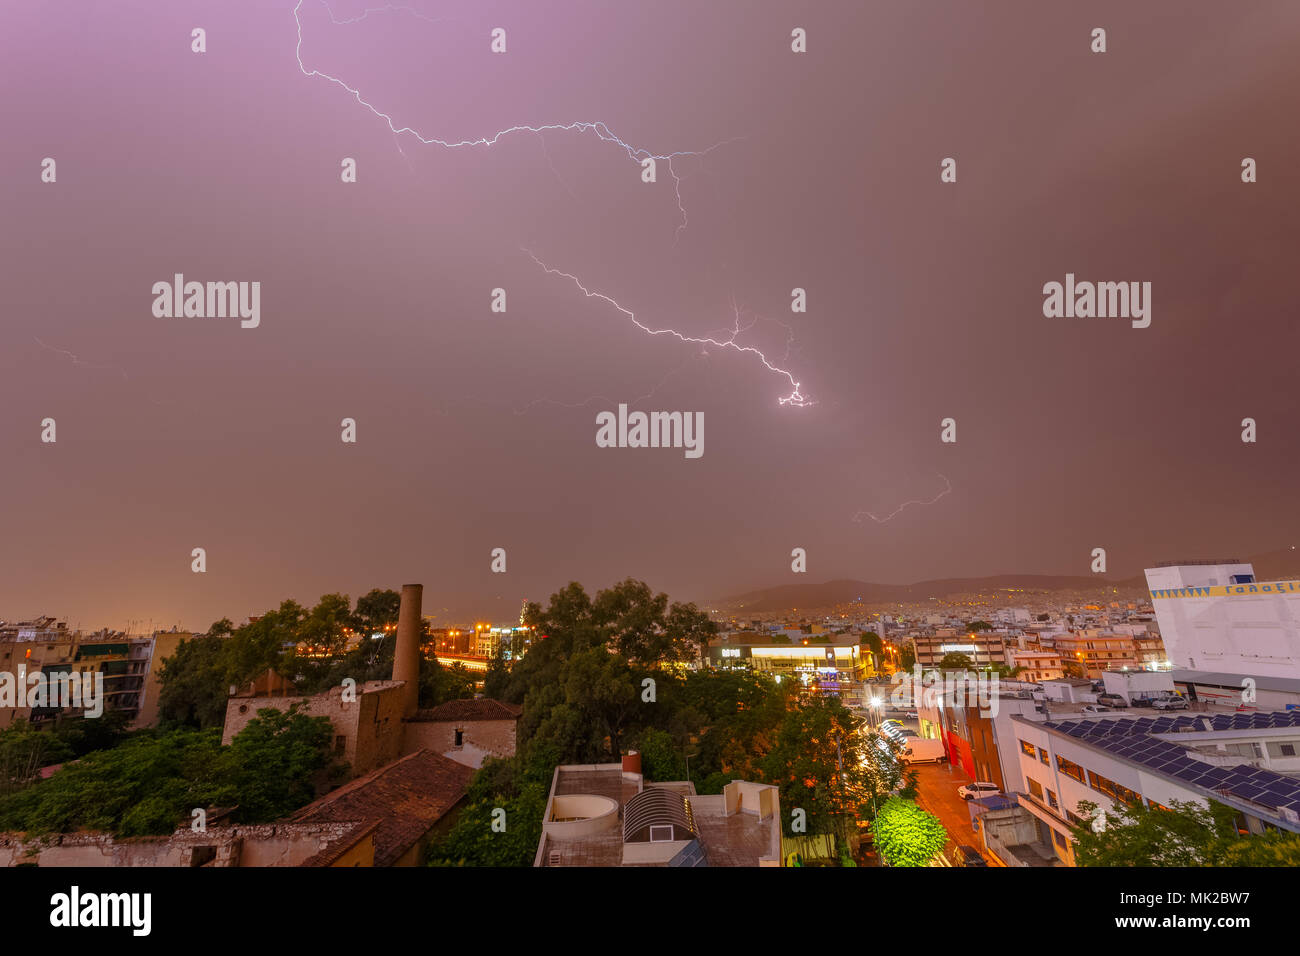 Intense stormy weather night with lightning bolts and thunderbolts against a dark cloudy sky.  Sudden seasonal weather changes often find city service Stock Photo